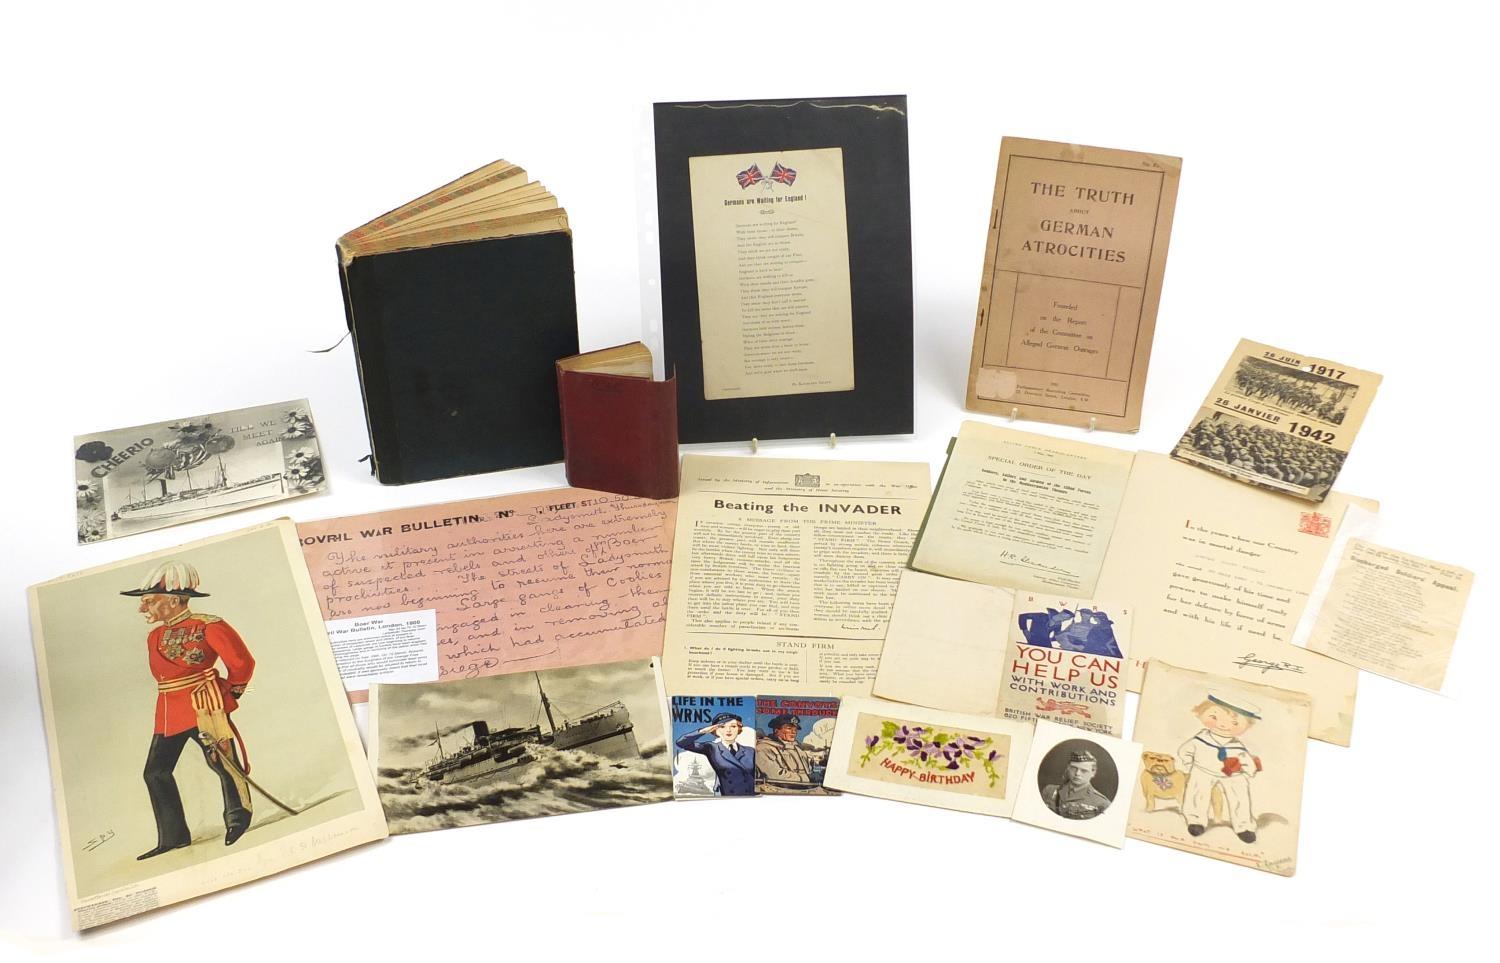 Military and naval ephemera including a Boer War Bovril war bulletin, two Tuck's Better Little